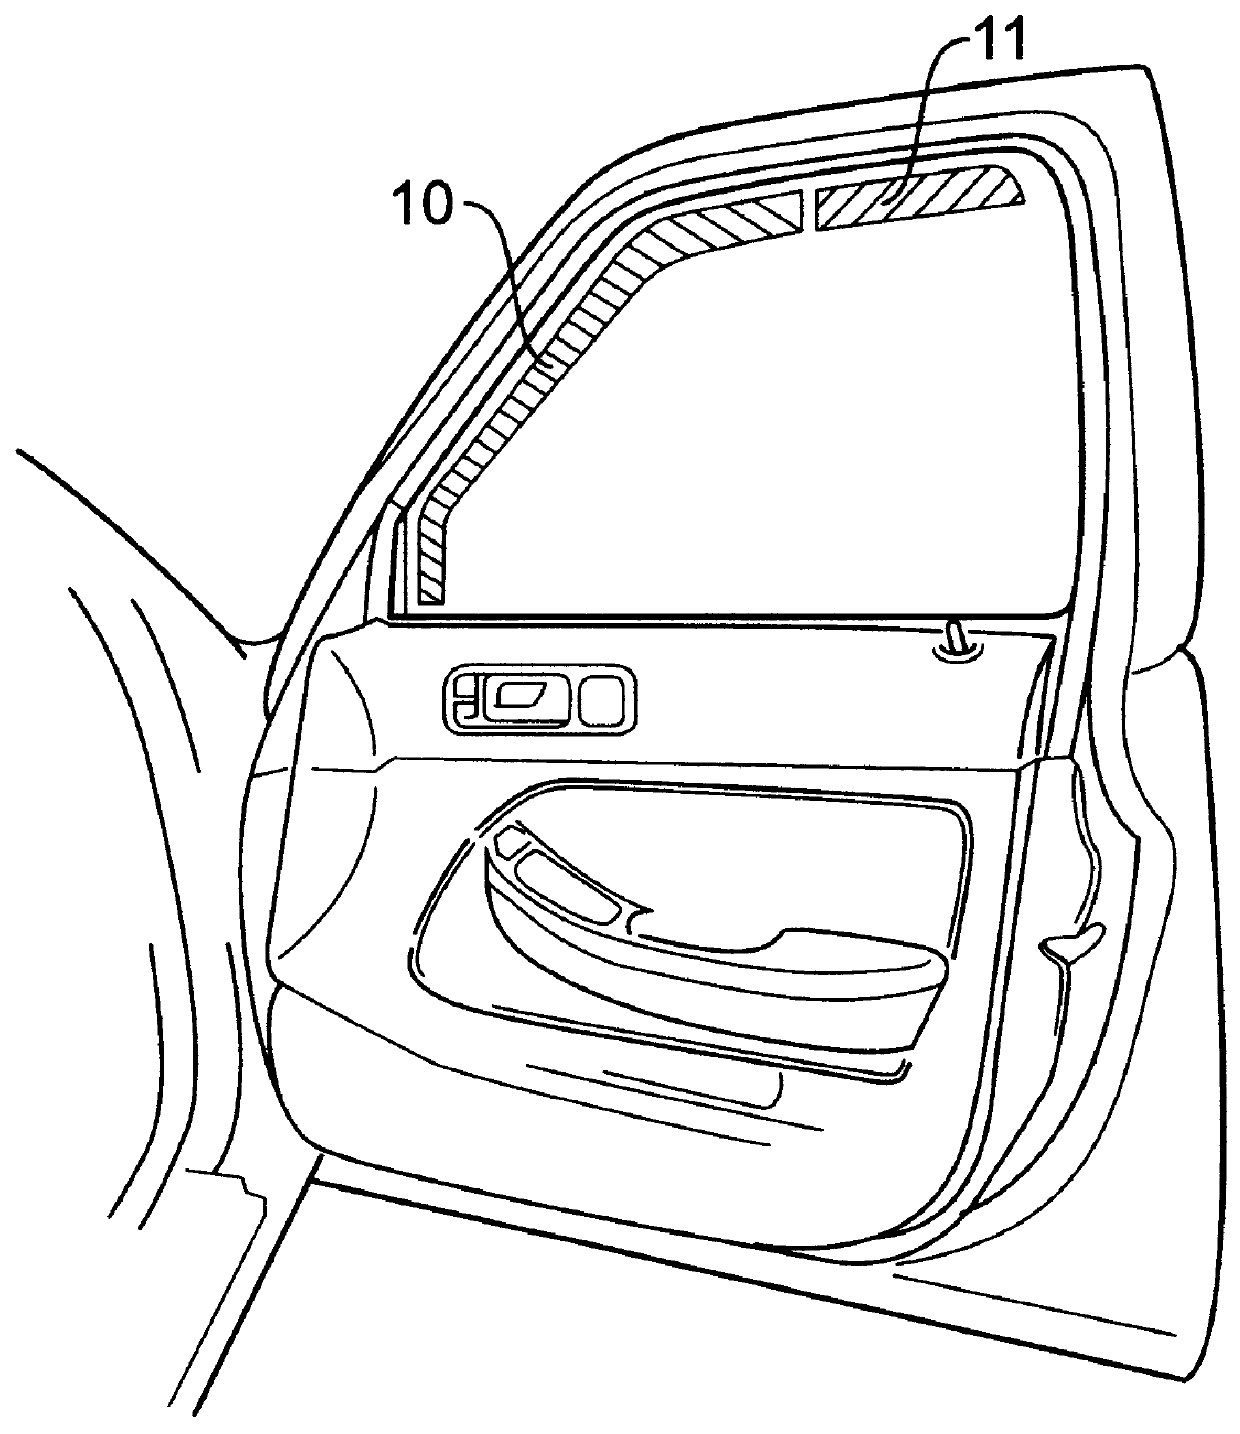 Safety device for automobile power window system